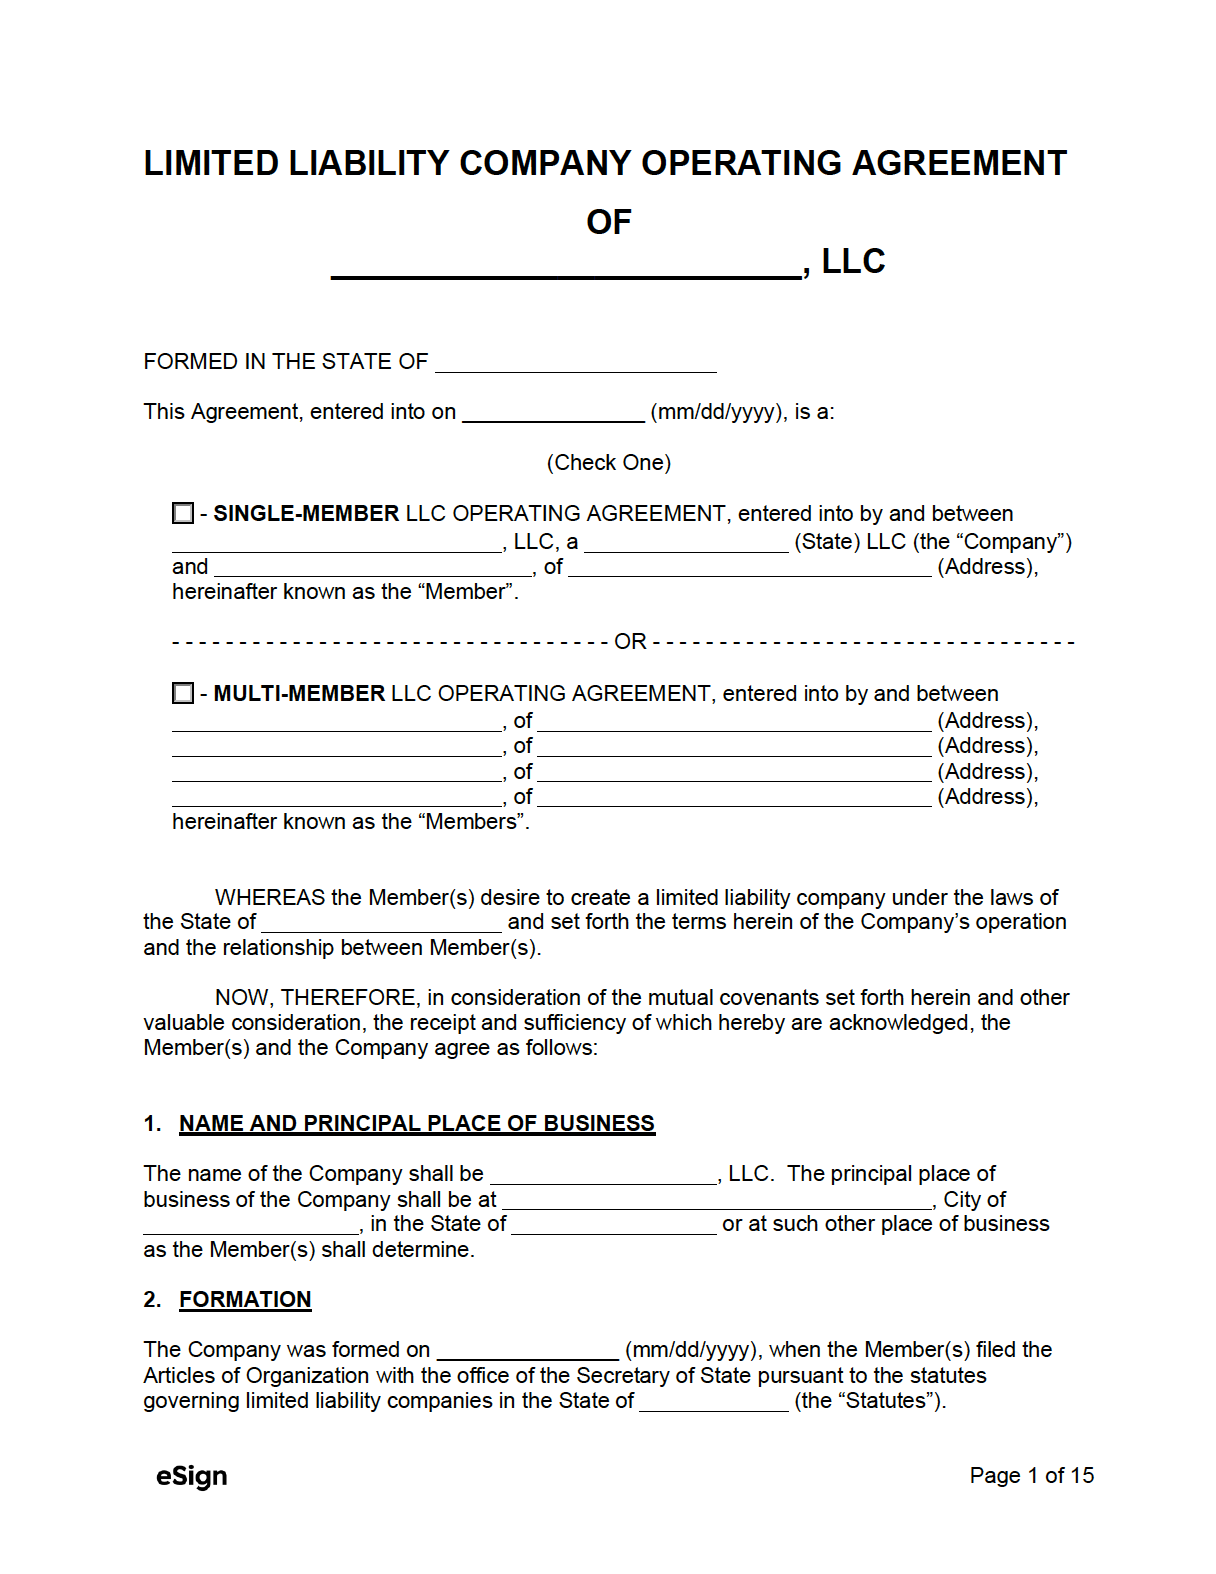 operating agreement template